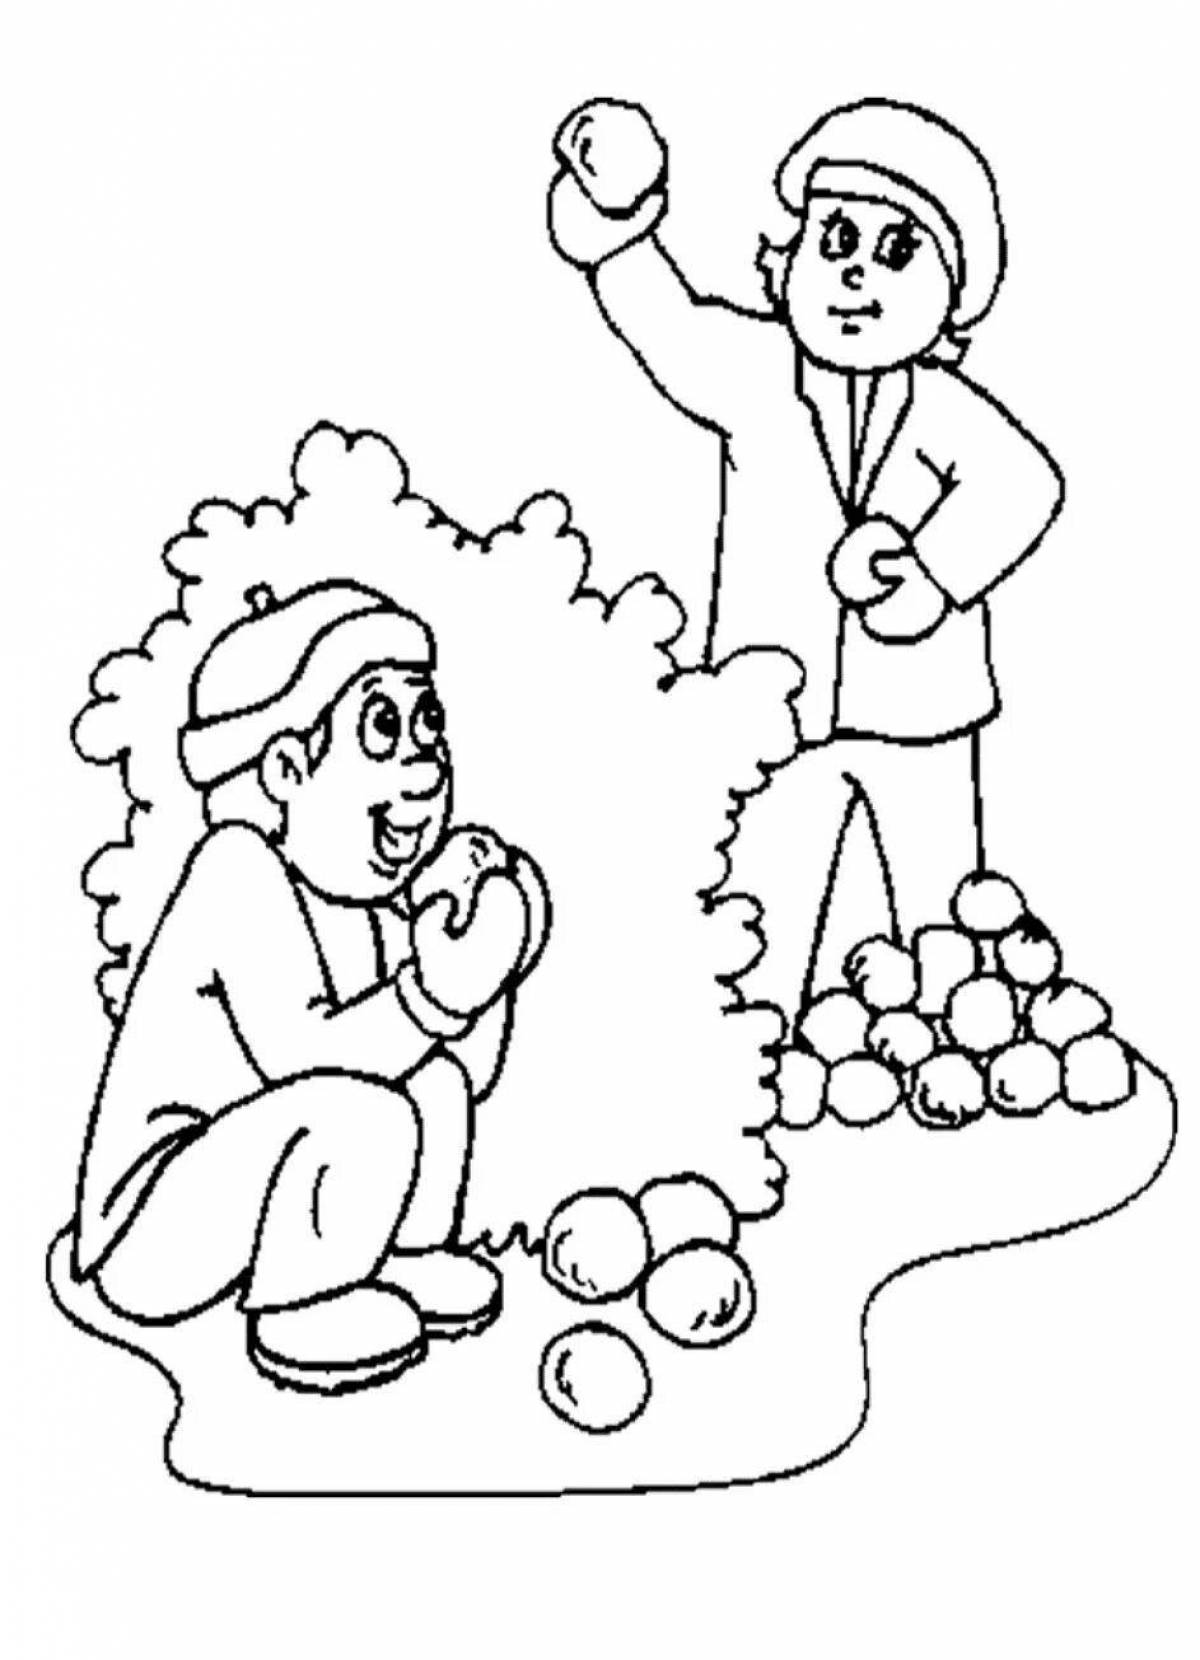 Amazing snowball coloring page for kids